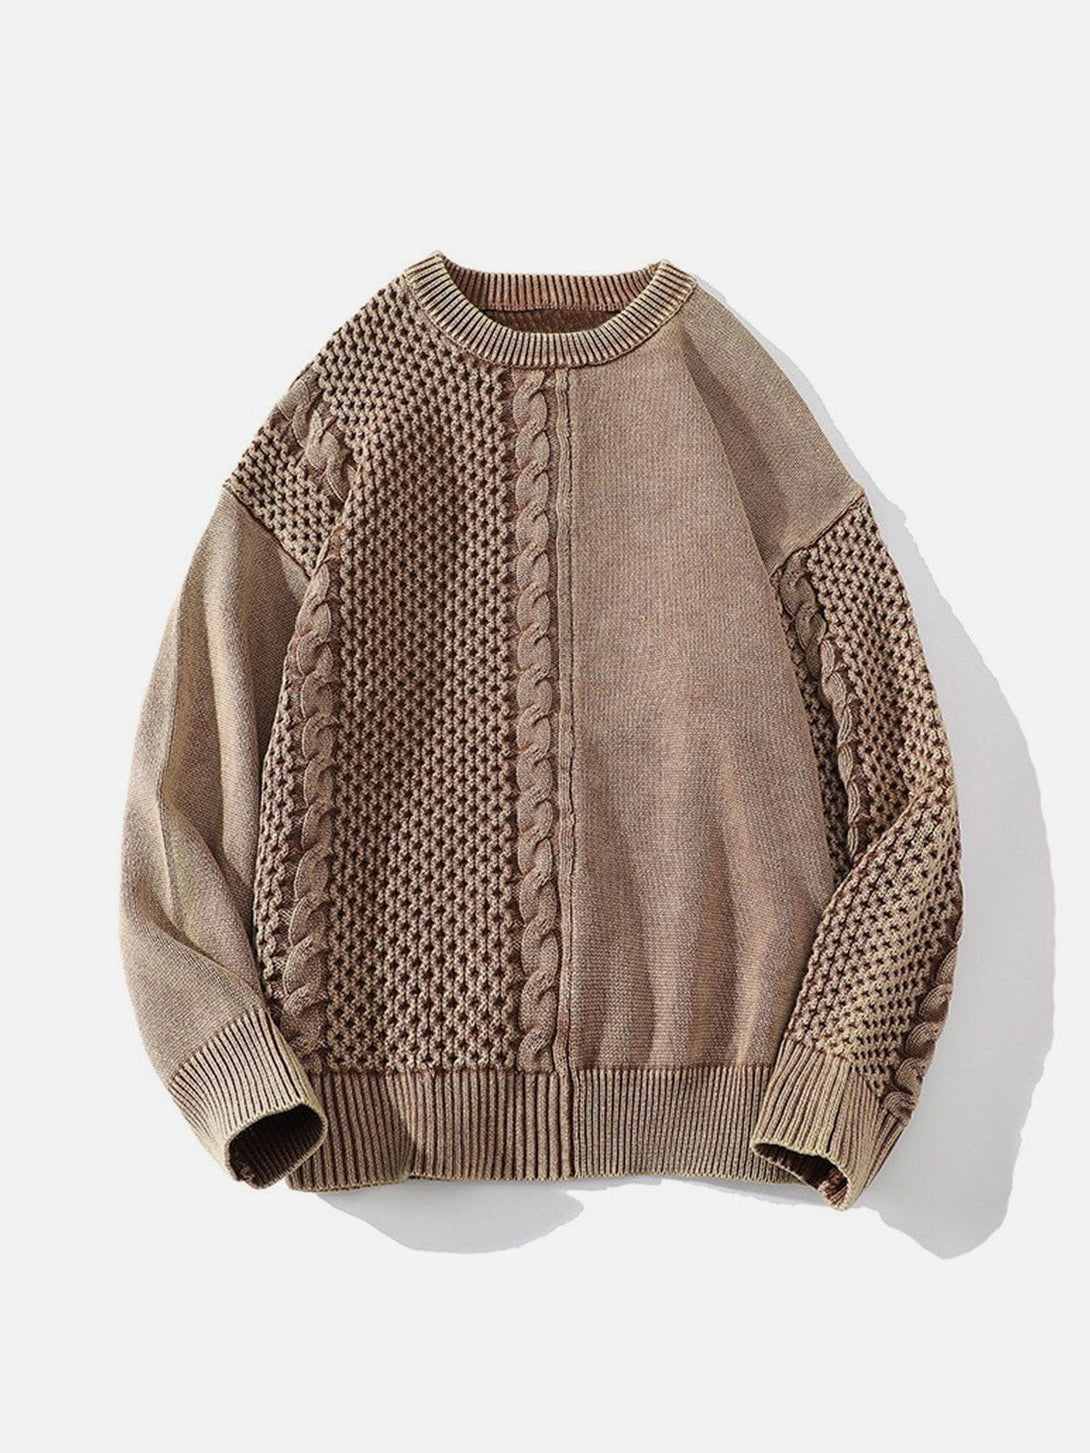 Majesda® - Washed Weave Design Sweater outfit ideas streetwear fashion